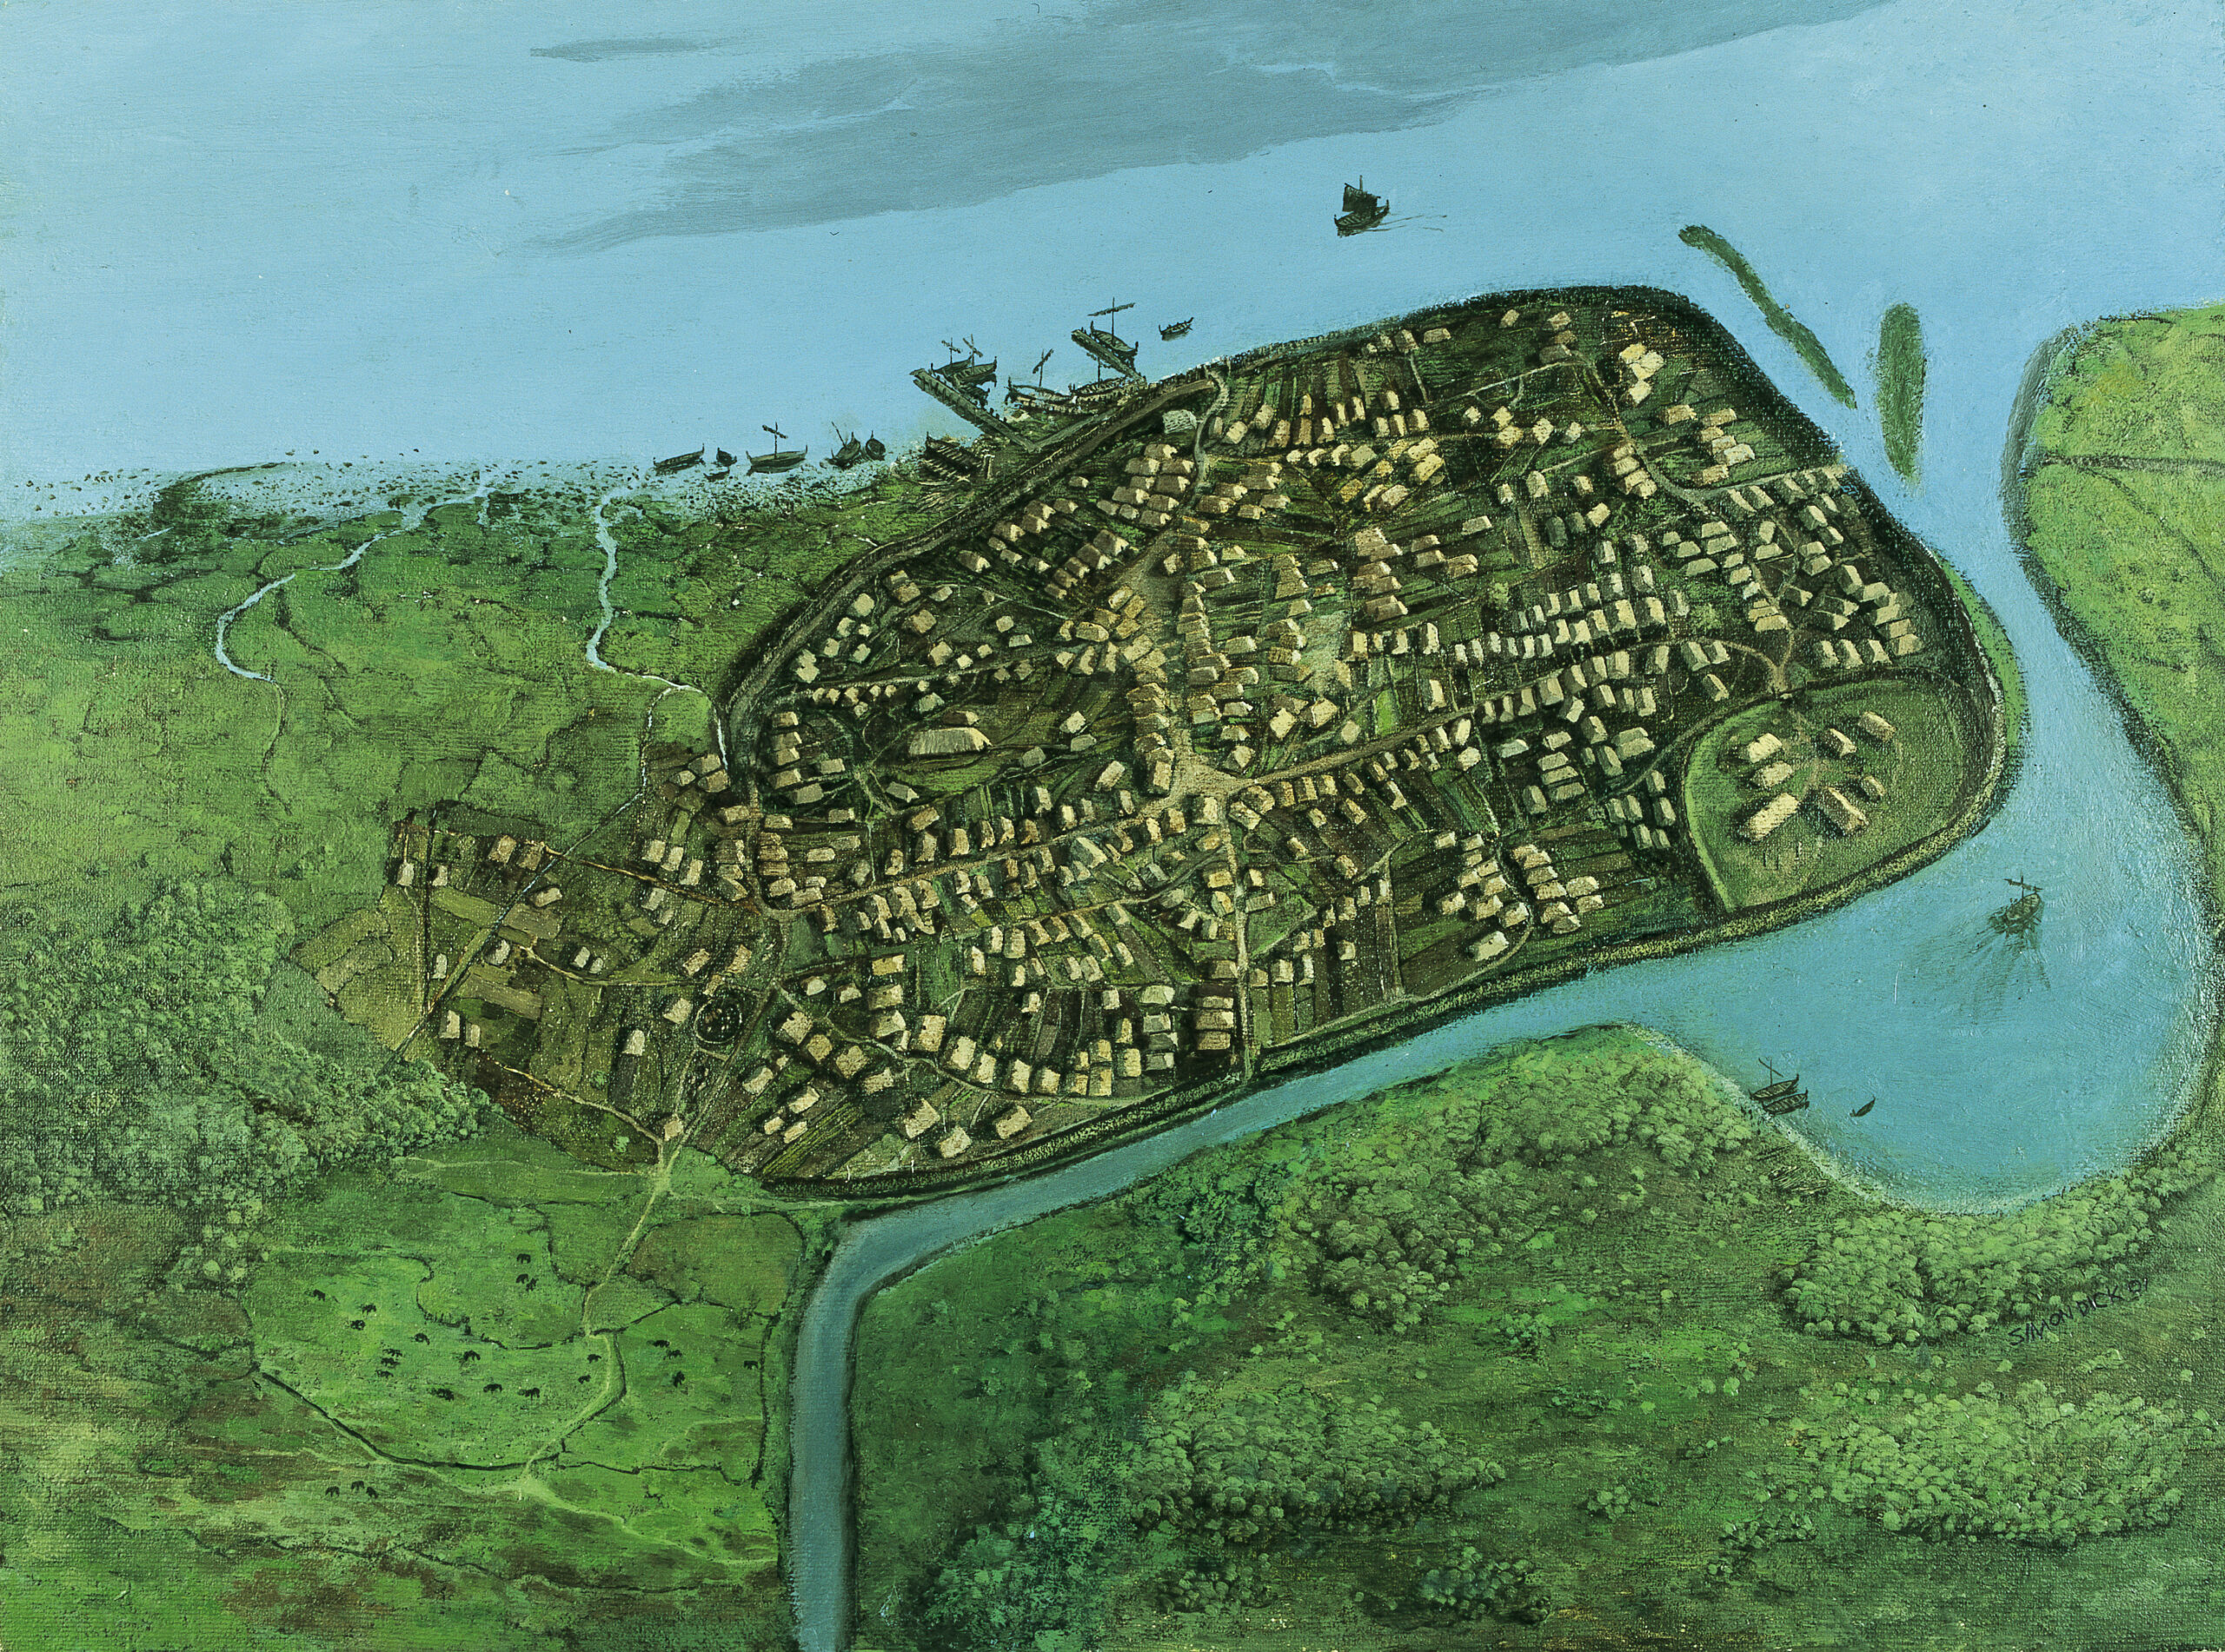 An illustration of what Viking Dublin would have looked like around 900 AD